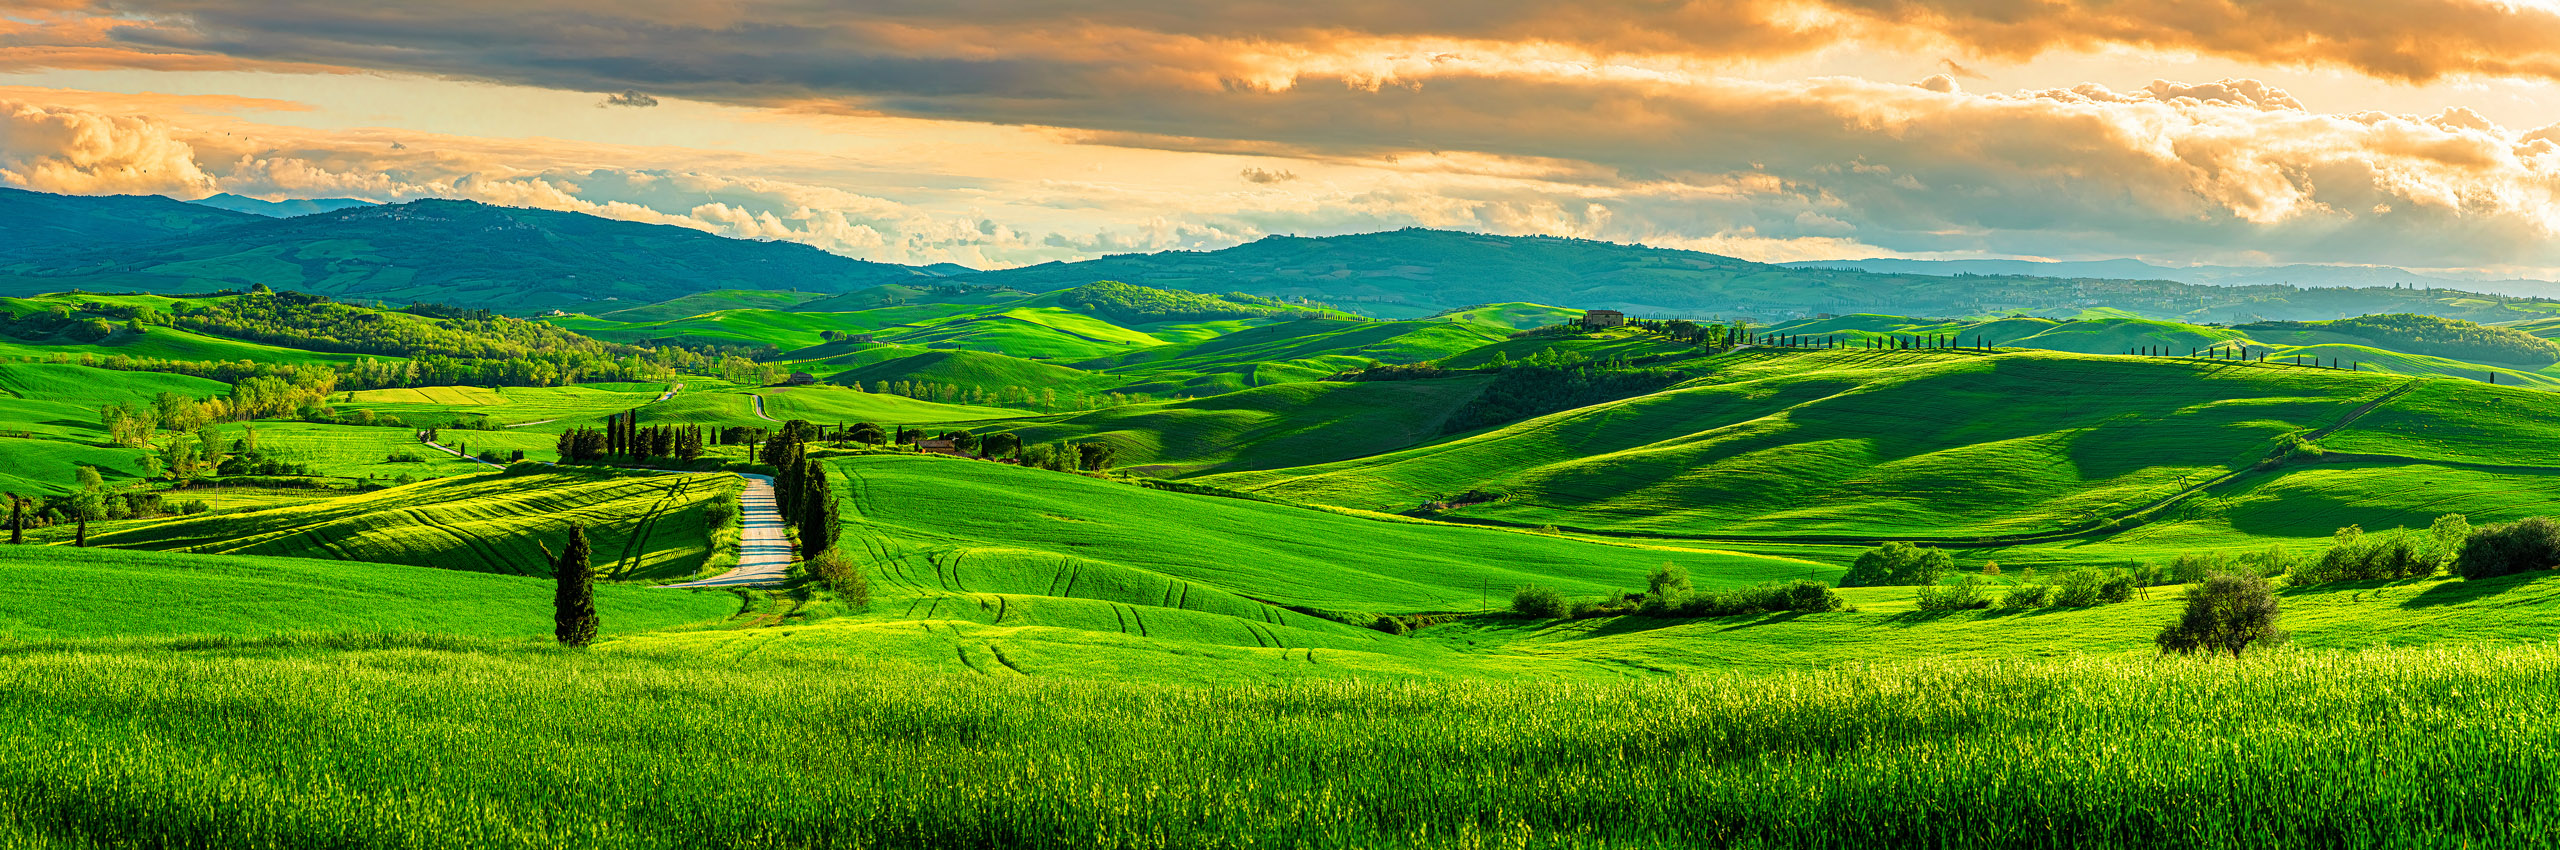 41148799 | Italy/Tuscany, Siena district, Orcia Valley, Pienza | © Paolo Evangelista/HUBER IMAGES